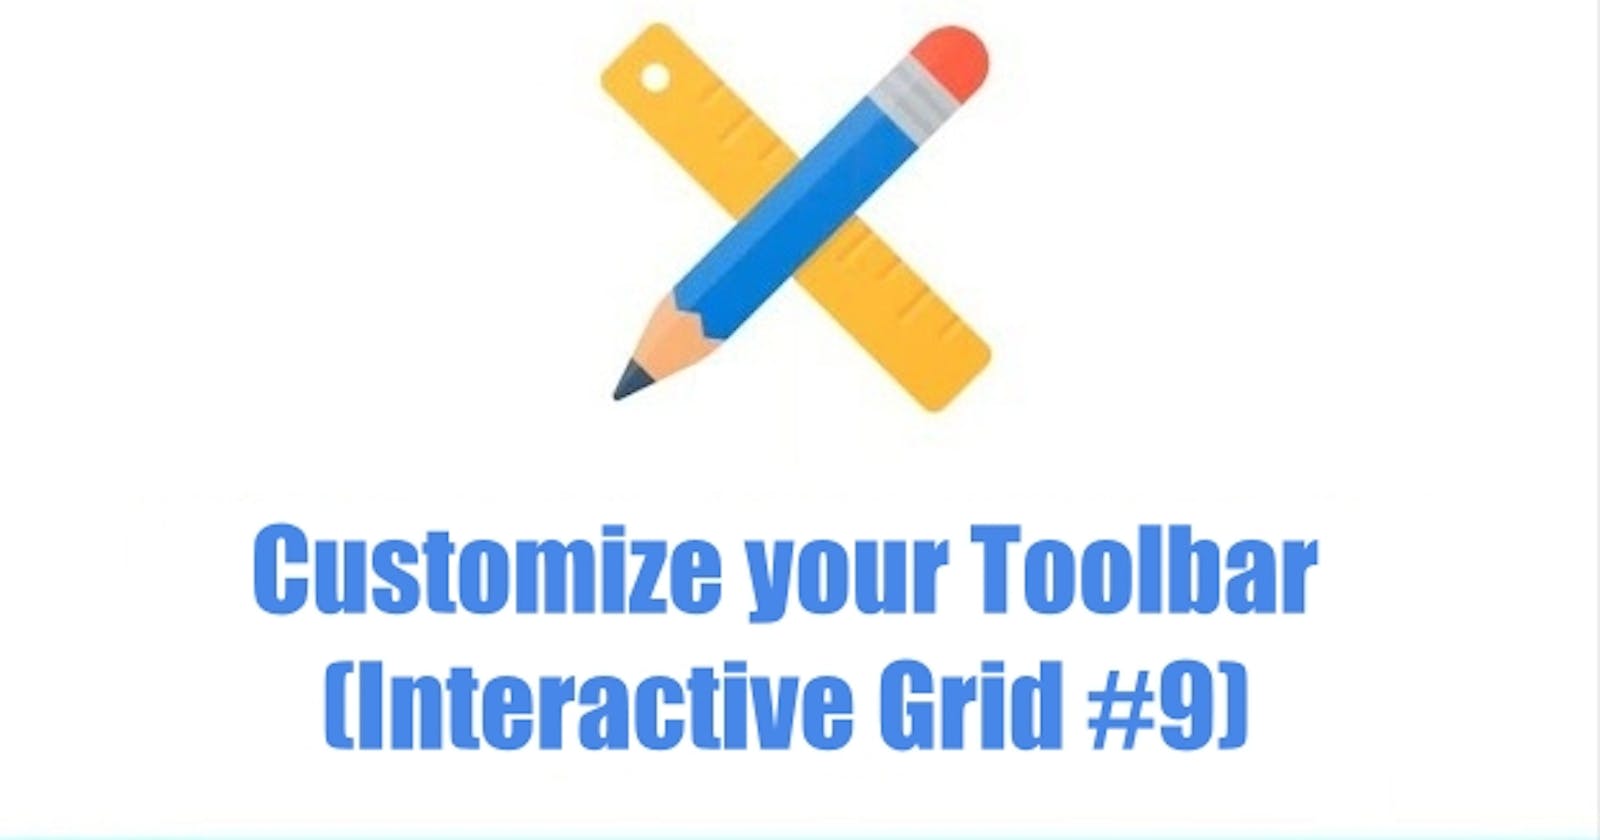 Customize your Toolbar (Interactive Grid #9)